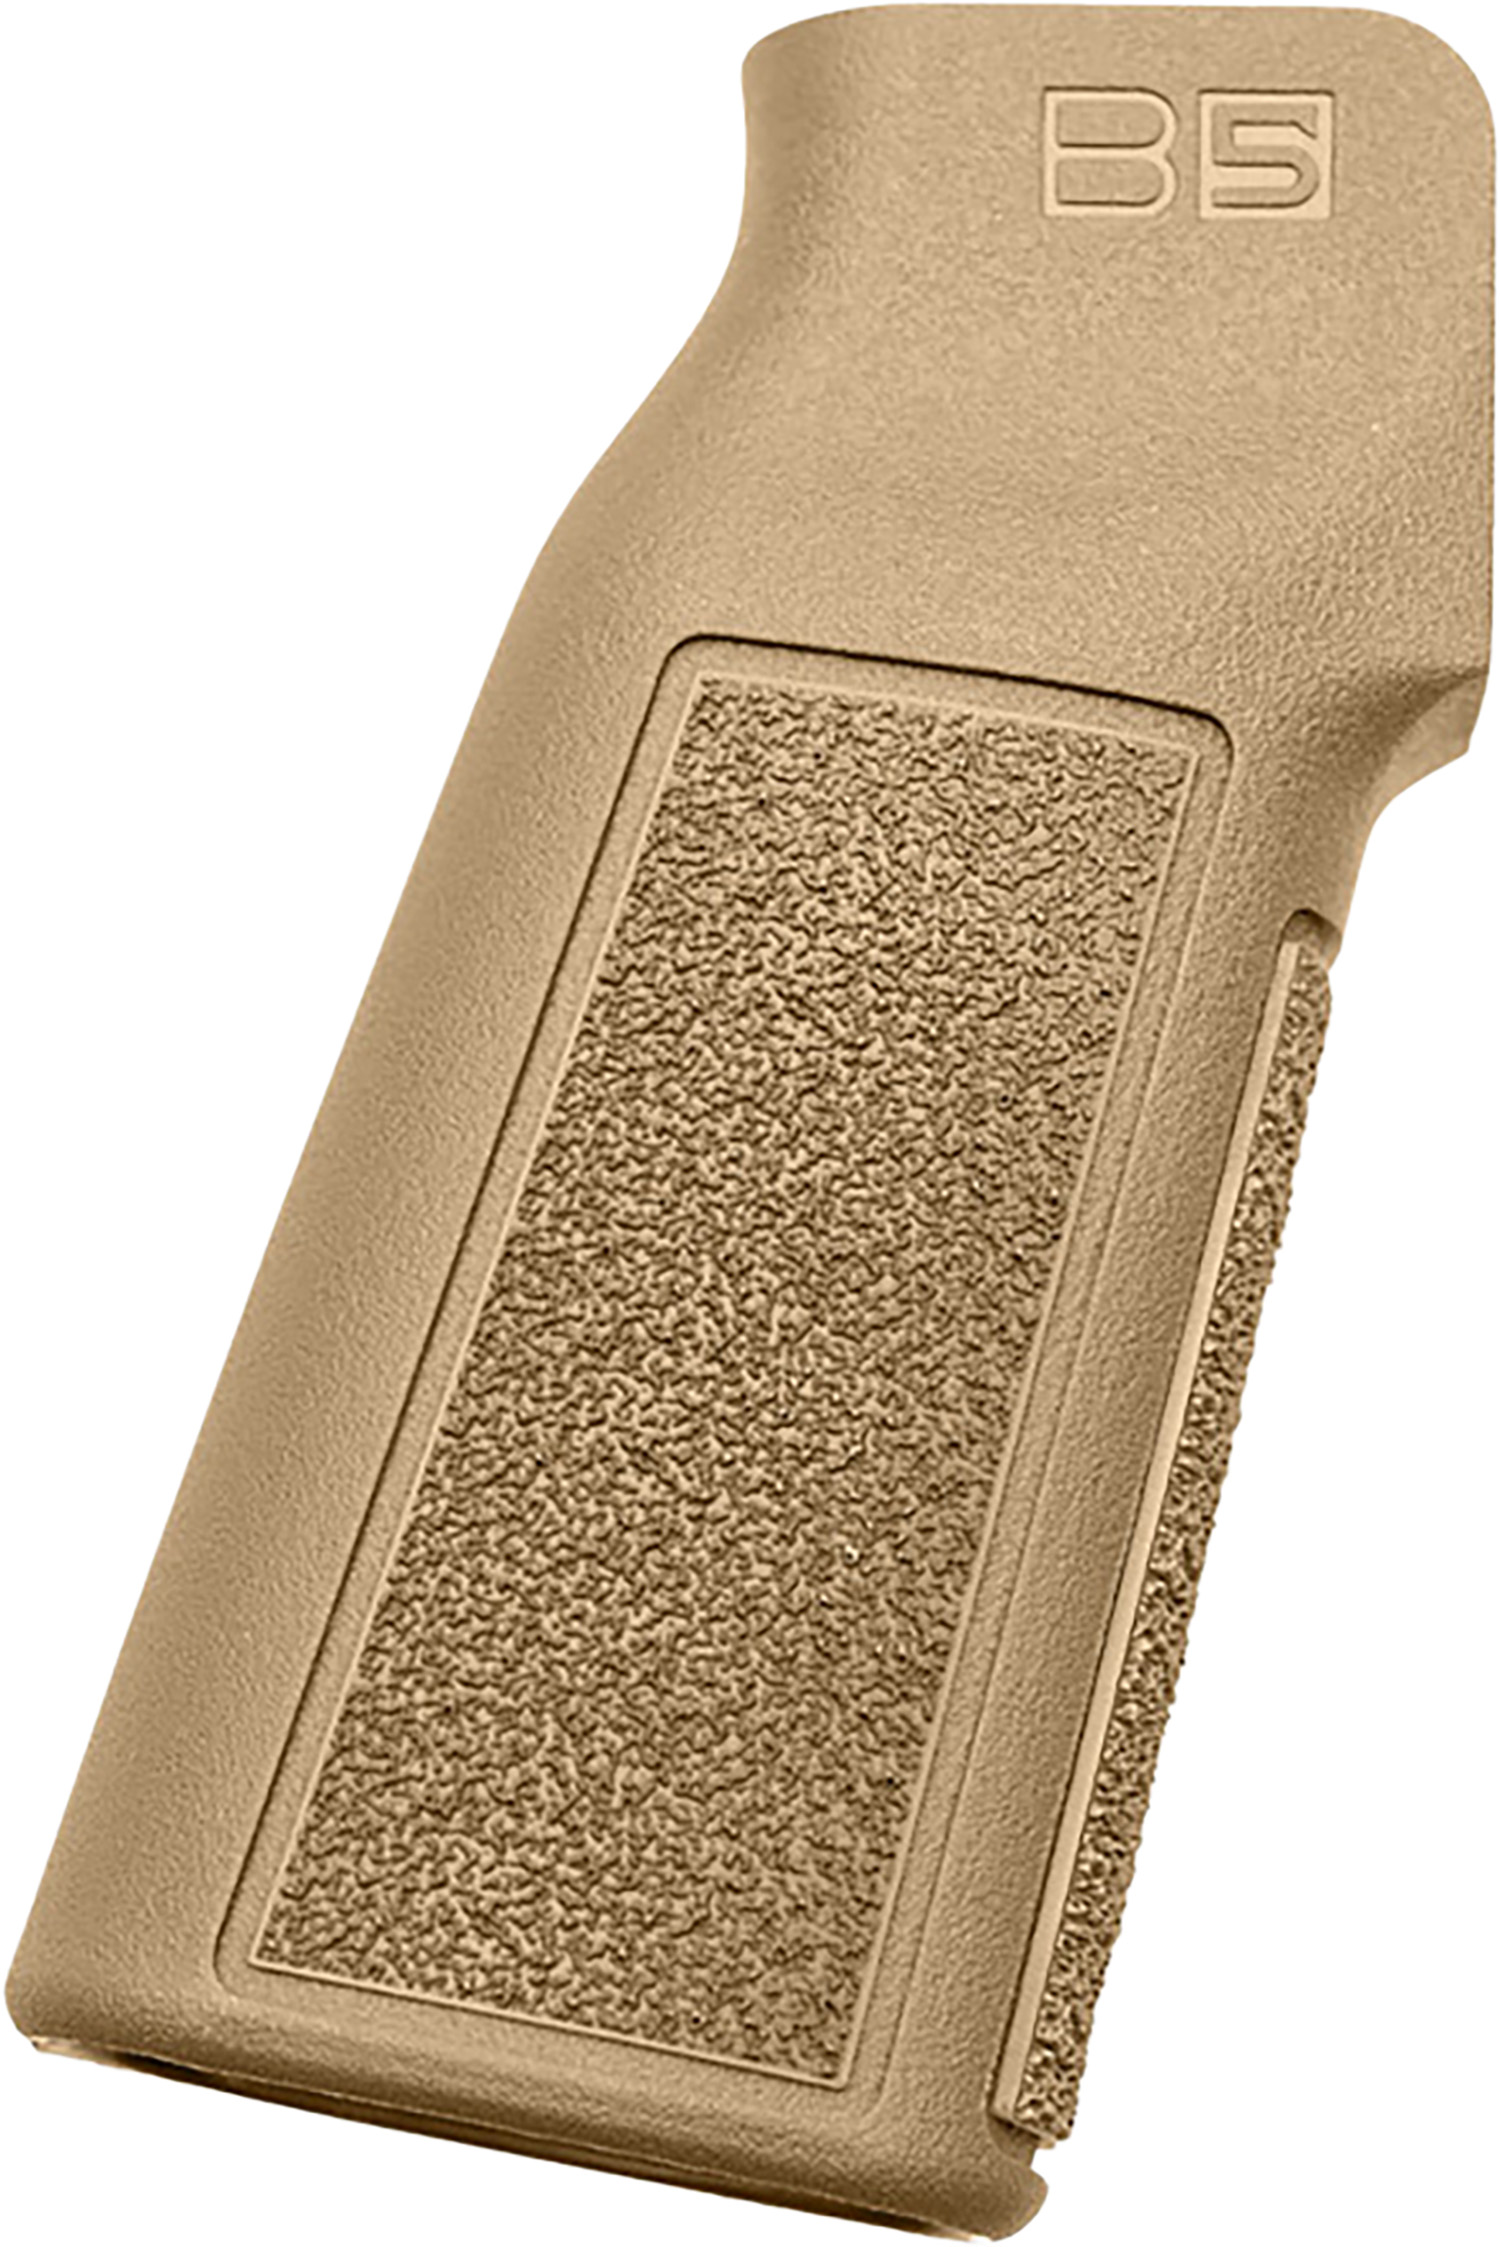 B5 Systems PGR1453 Type 22 P-Grip FDE Aggressive Textured Polymer, Increased Vertical Grip Angle, Fits AR-Platform